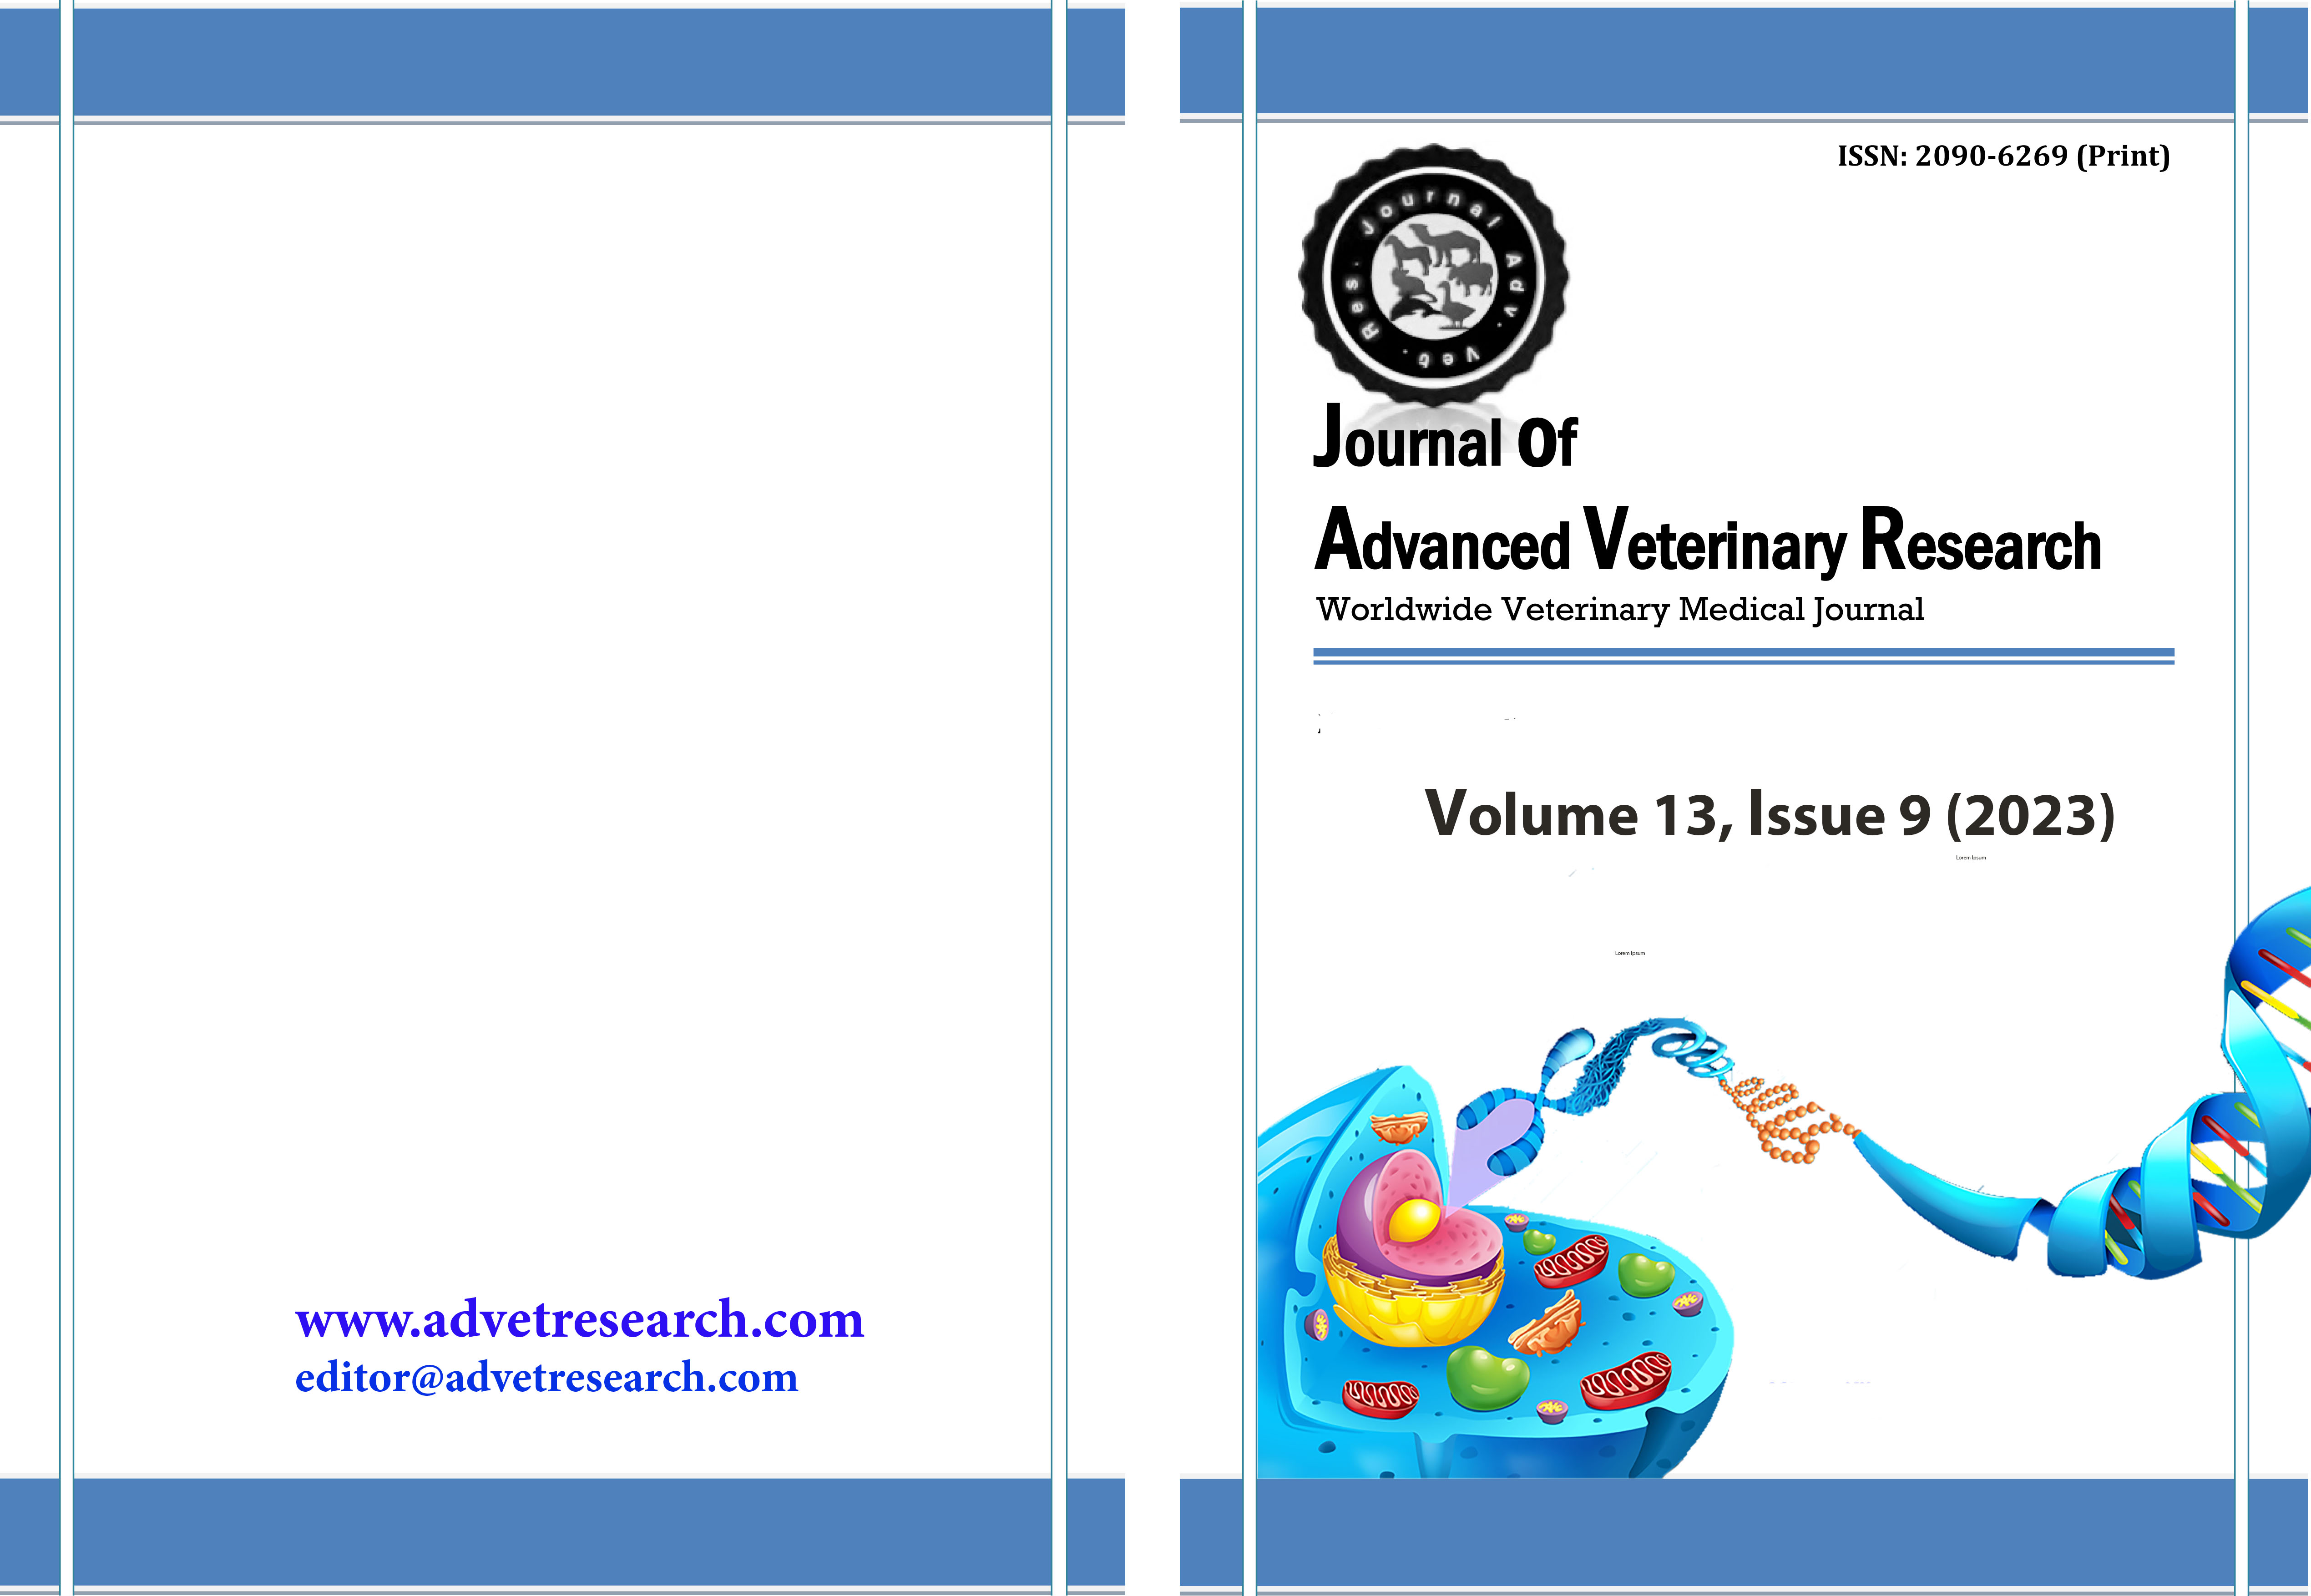 					View Vol. 13 No. 9 (2023): Special Issue: The 12th International Scientific Conference, Faculty of Veterinary Medicine, Mansoura University, Egypt (17-20 September 2023)
				